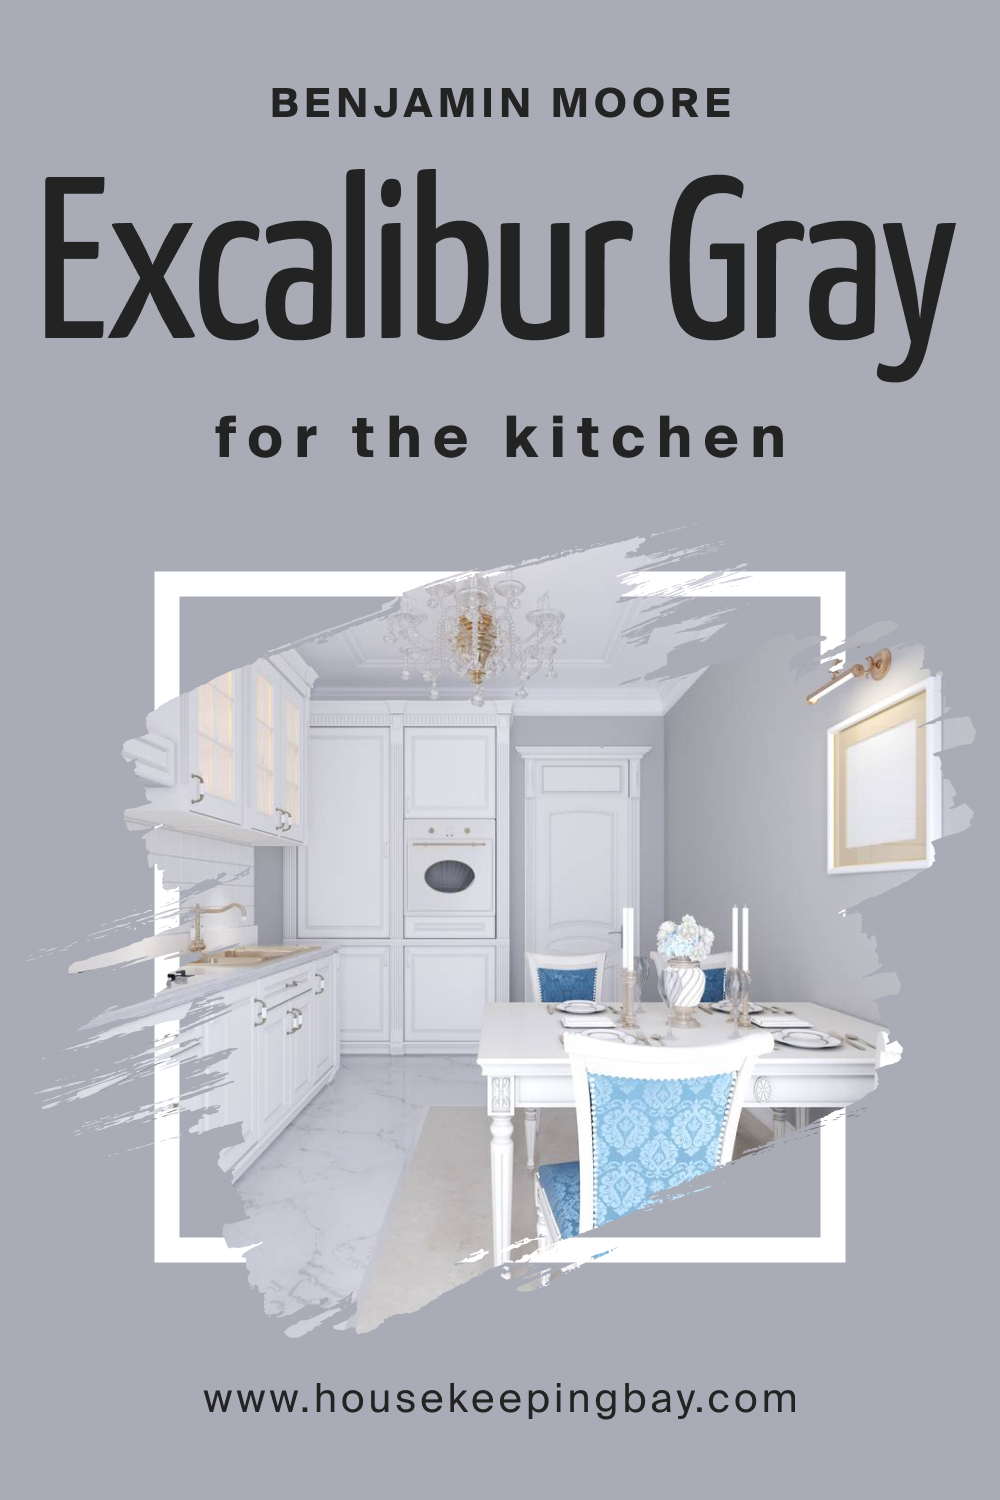 How to Use BM Excalibur Gray 2118-50 in the Kitchen?